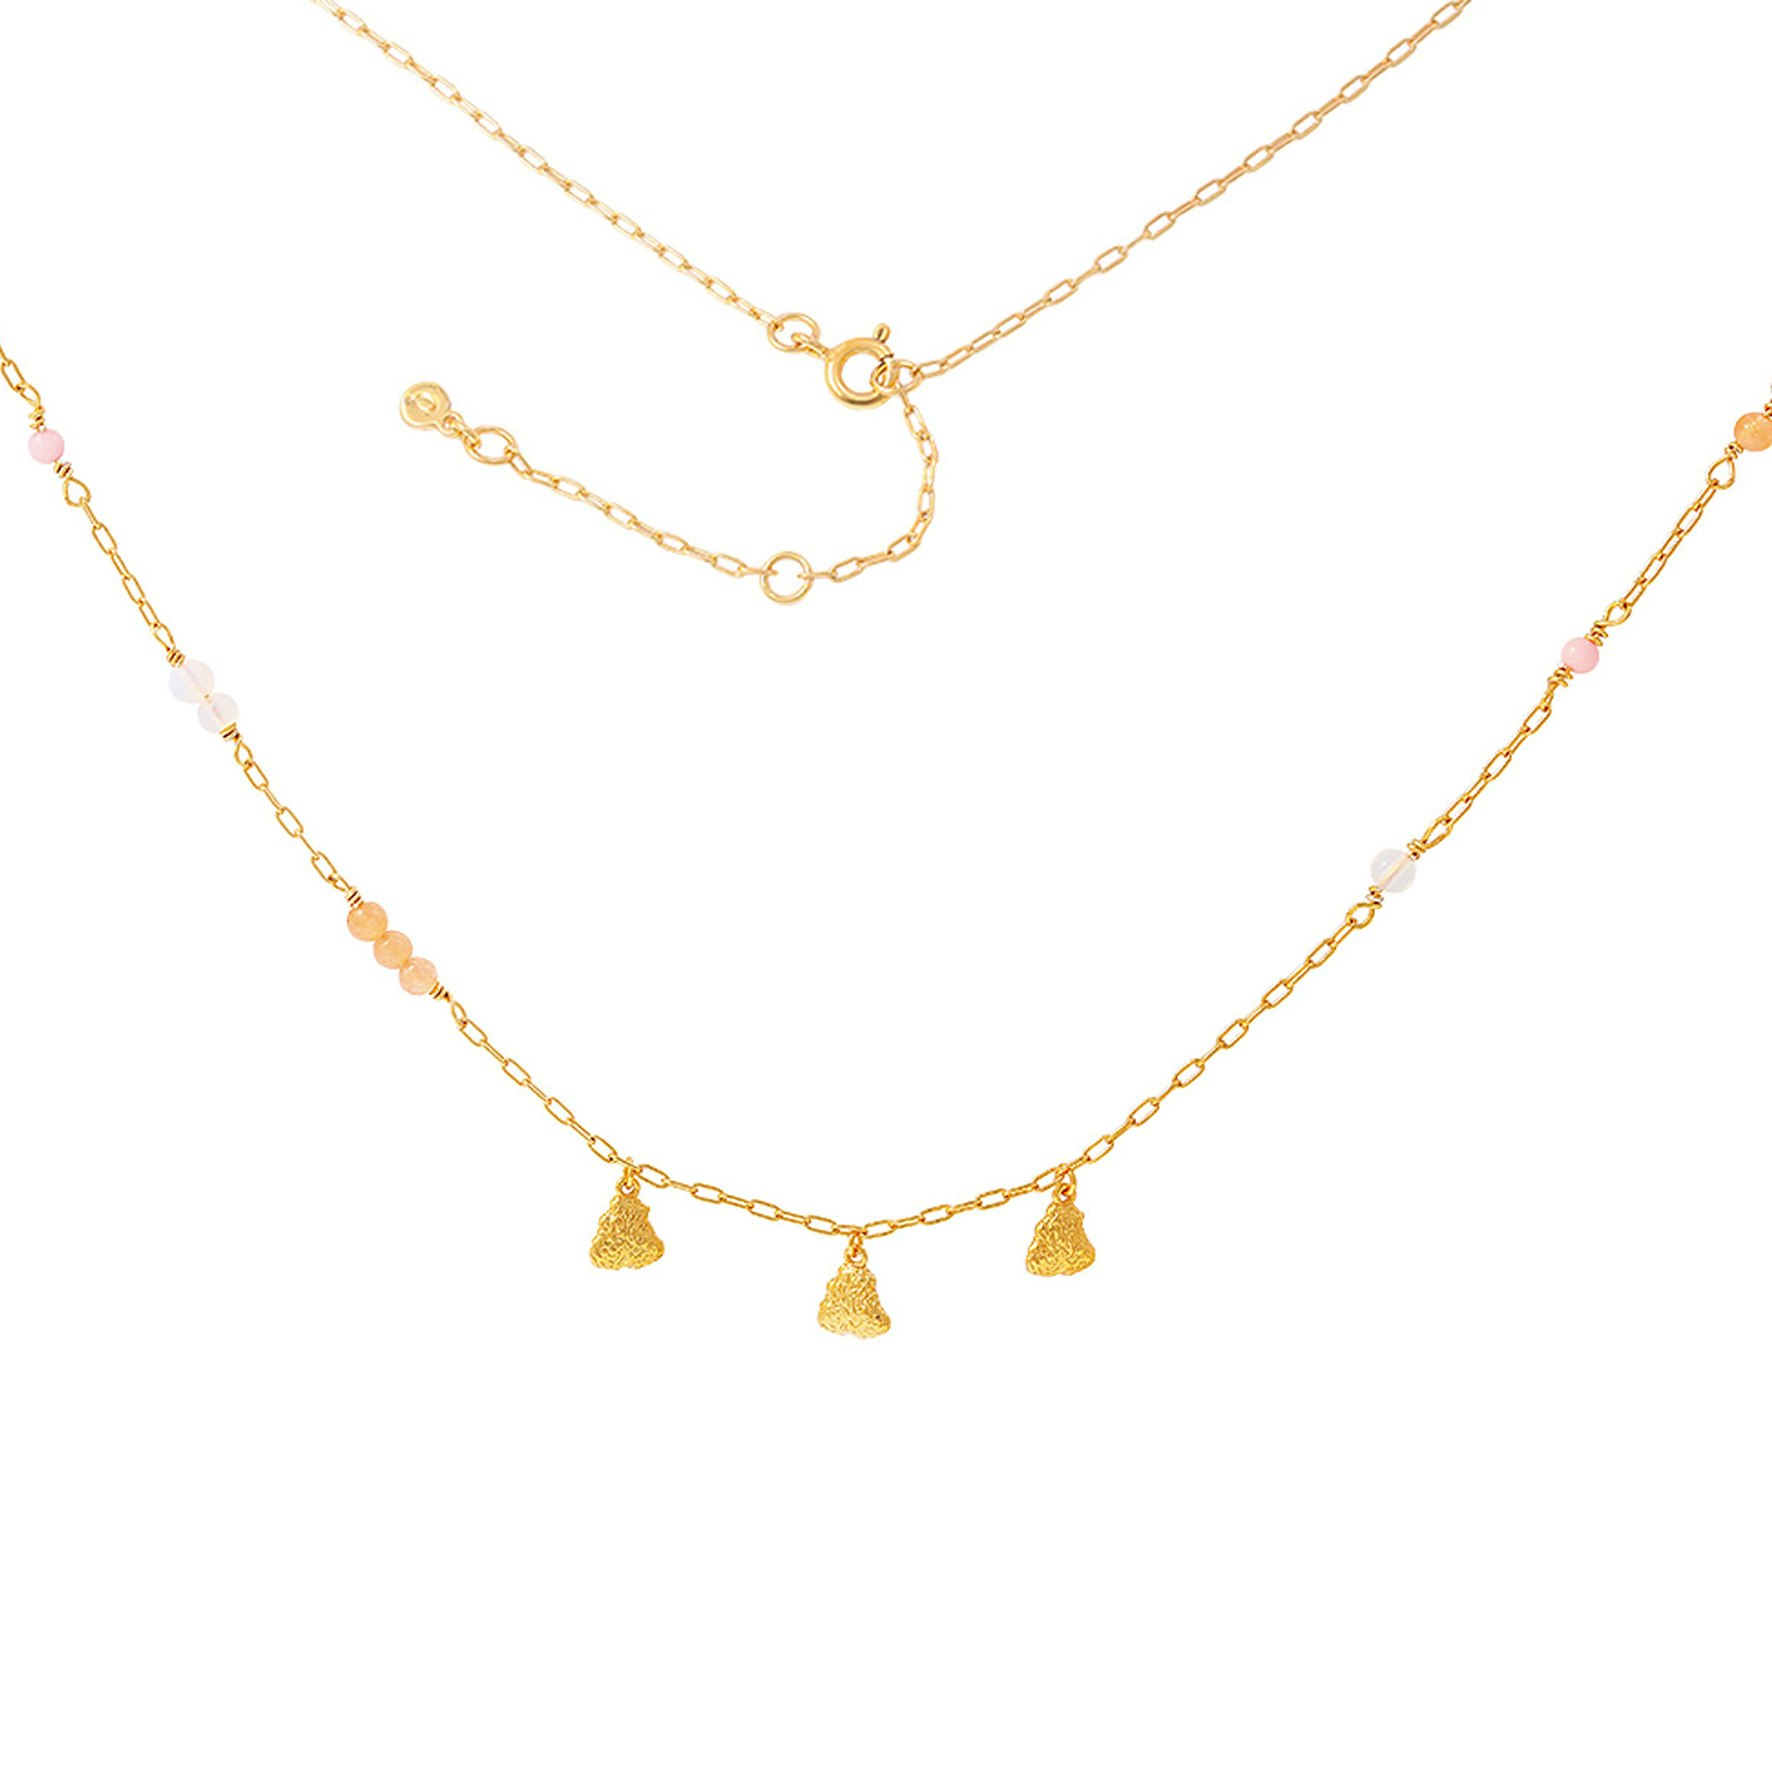 Coralie Grande Necklace from Hultquist Copenhagen in Goldplated Silver Sterling 925